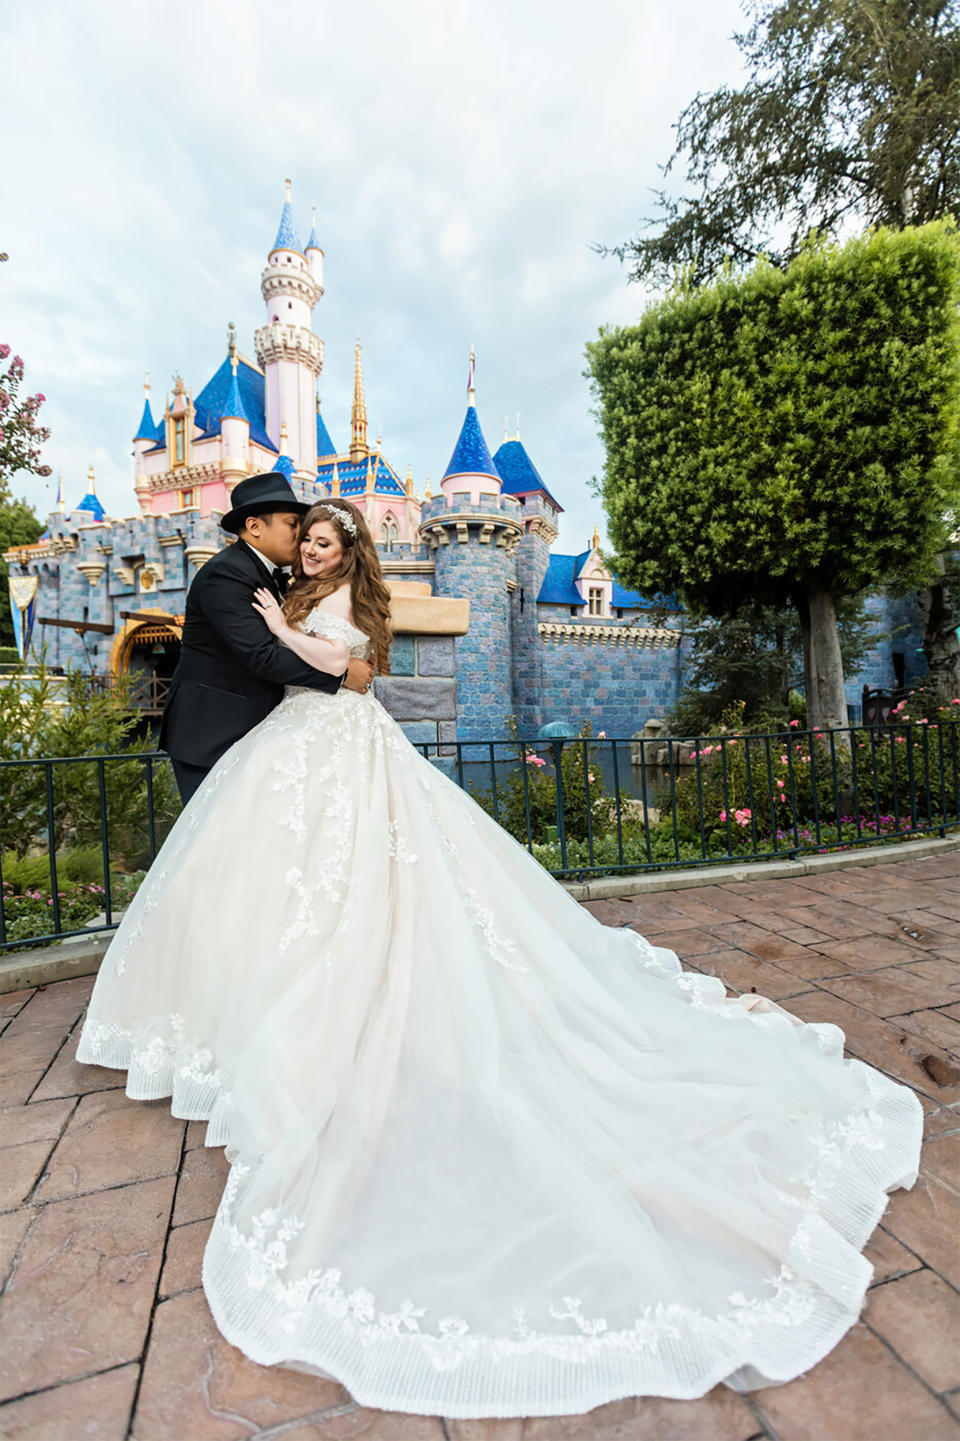 Shellie and her husband have only had vow renewals at Disneyland Resort, but in the future they plan to have at least one at Walt Disney World in Orlando, Florida. (Photos by Jenna Henderson/White Rabbit Photo Boutique, Courtesy The Serial Bride)